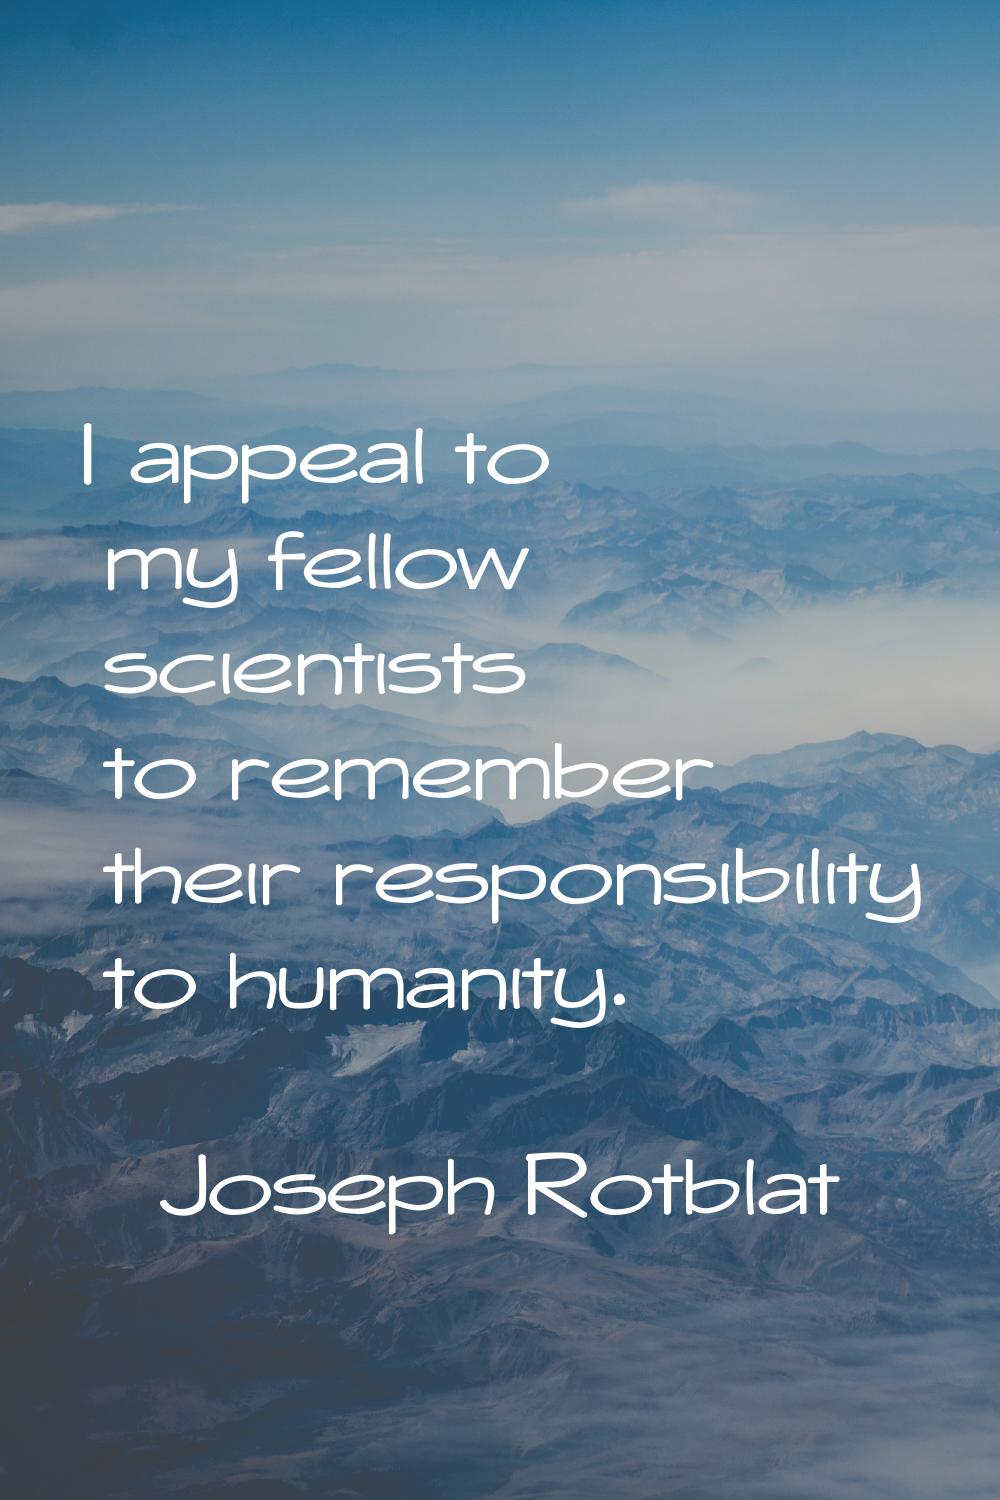 I appeal to my fellow scientists to remember their responsibility to humanity.